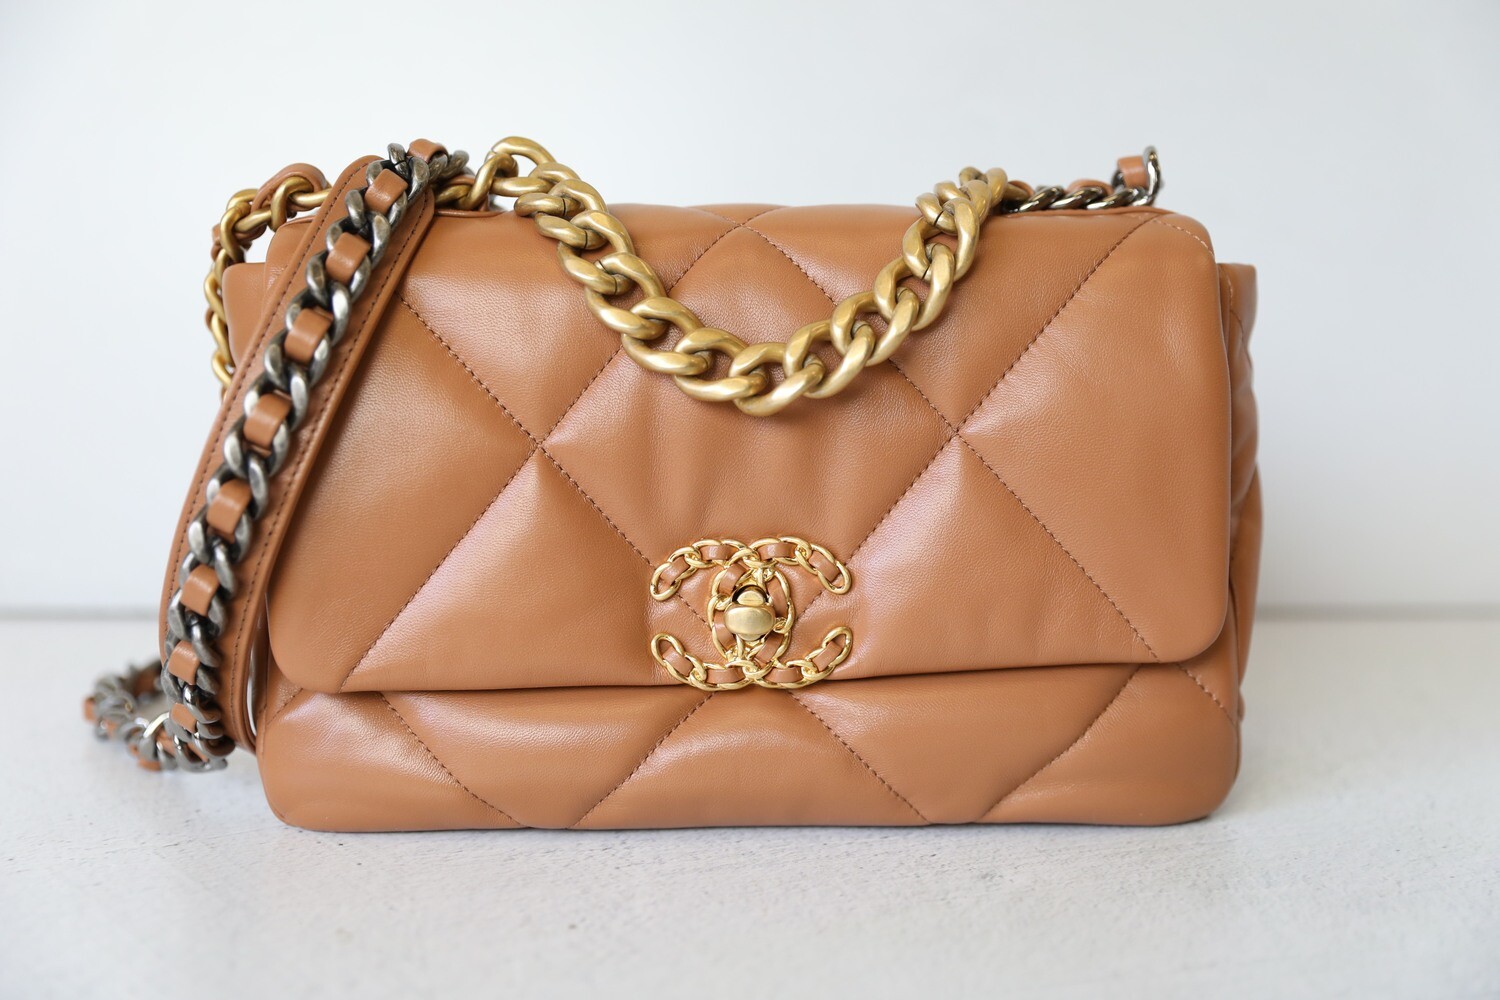 Chanel 19 leather handbag Chanel Camel in Leather - 35092621